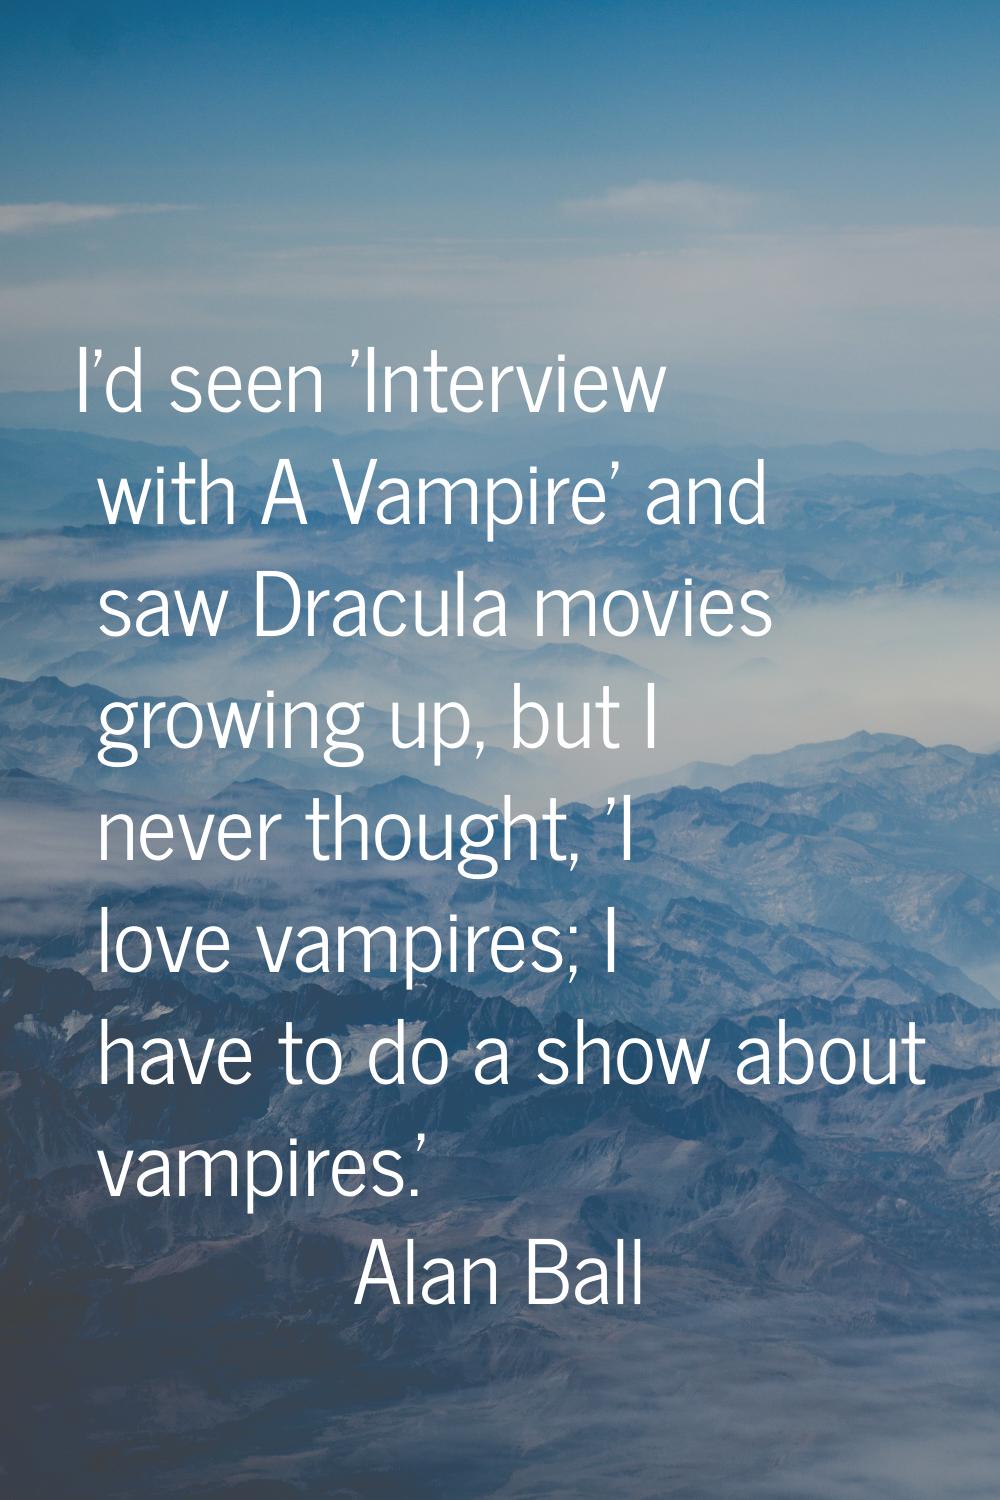 I'd seen 'Interview with A Vampire' and saw Dracula movies growing up, but I never thought, 'I love